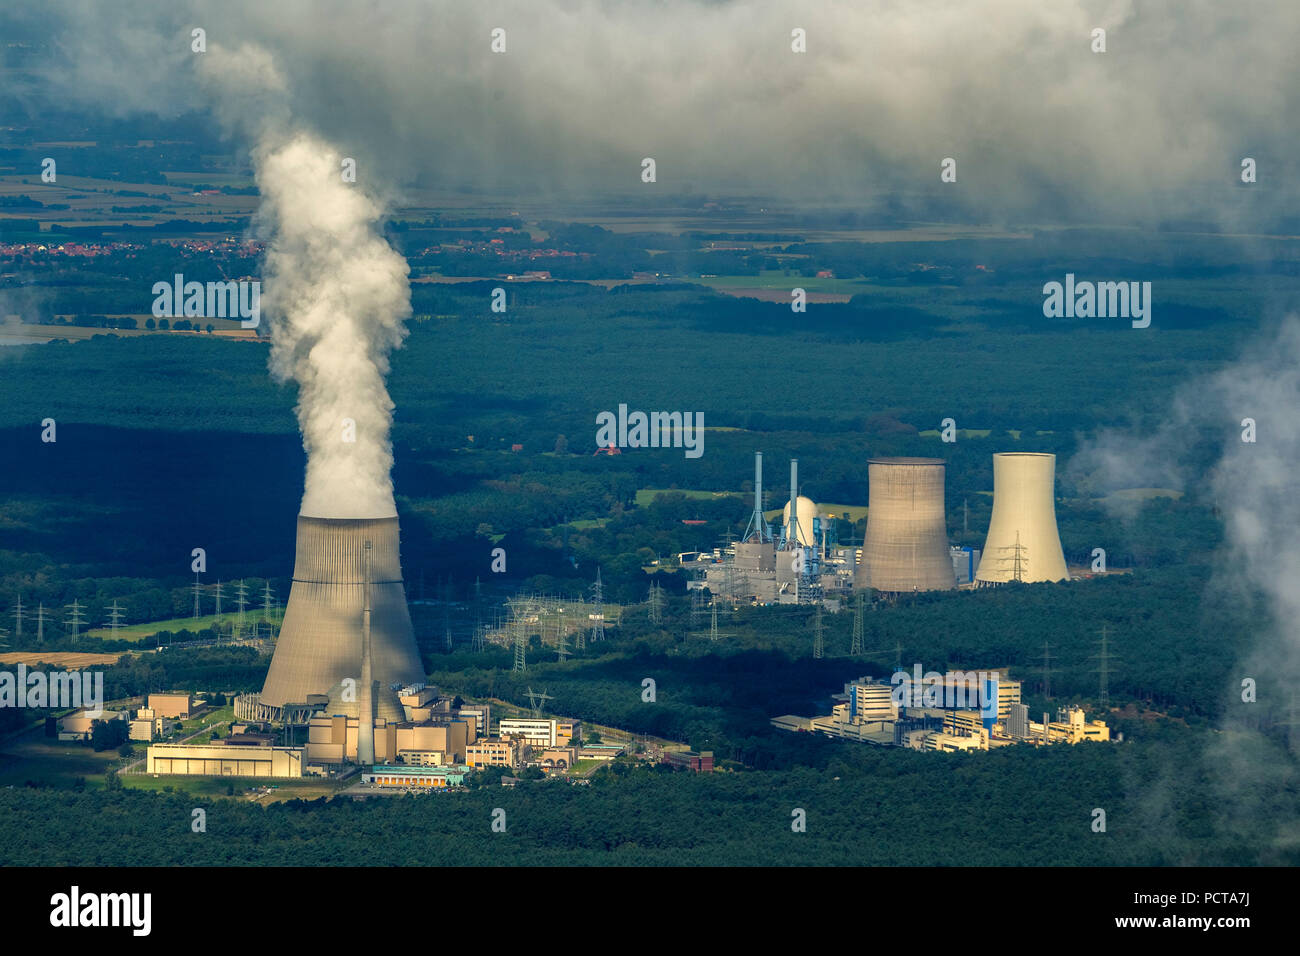 Aerial photo, Lingen nuclear power plant, Lingen, clouds, cooling tower, Lingen, Emsland, Lower Saxony, Germany Stock Photo